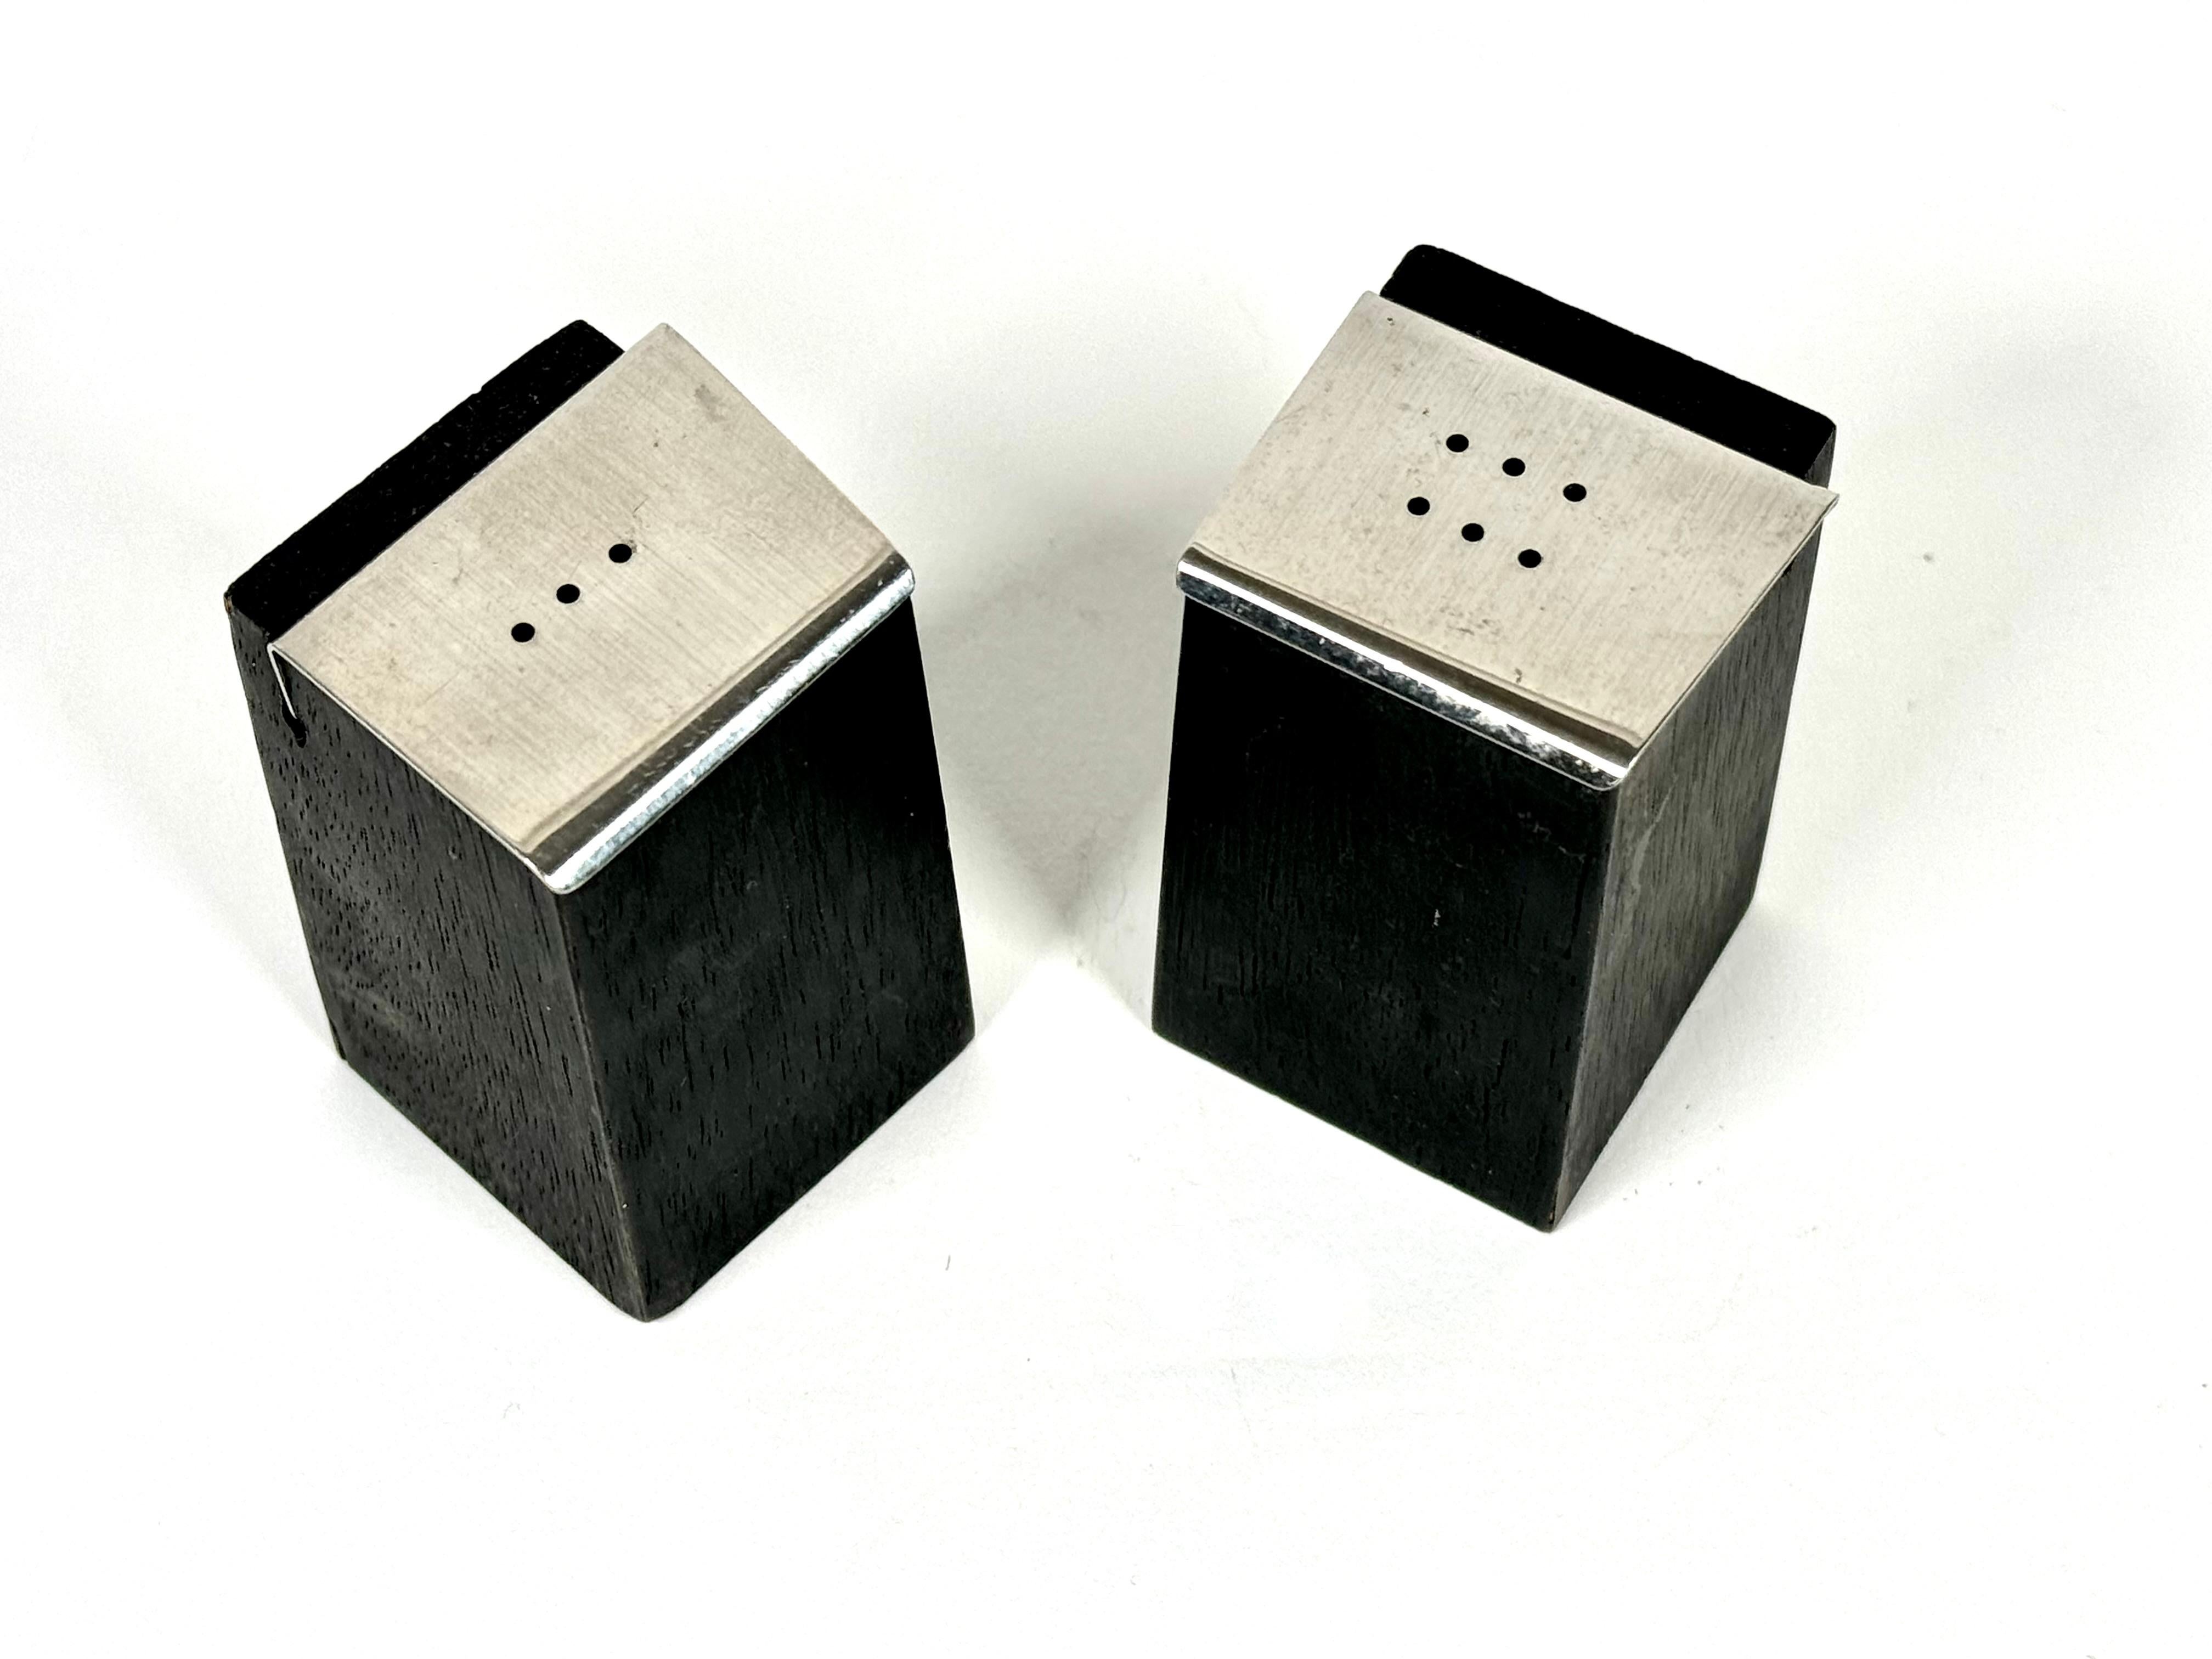 Hand crafted salt and pepper shakers by Bay Area artist Milton Cavagnaro, he was a jeweler, painter and craft maker such as these shakers for example. Black wooden bodies in a modernist form with asymmetric stainless steel tops. Cavagnaro's work was